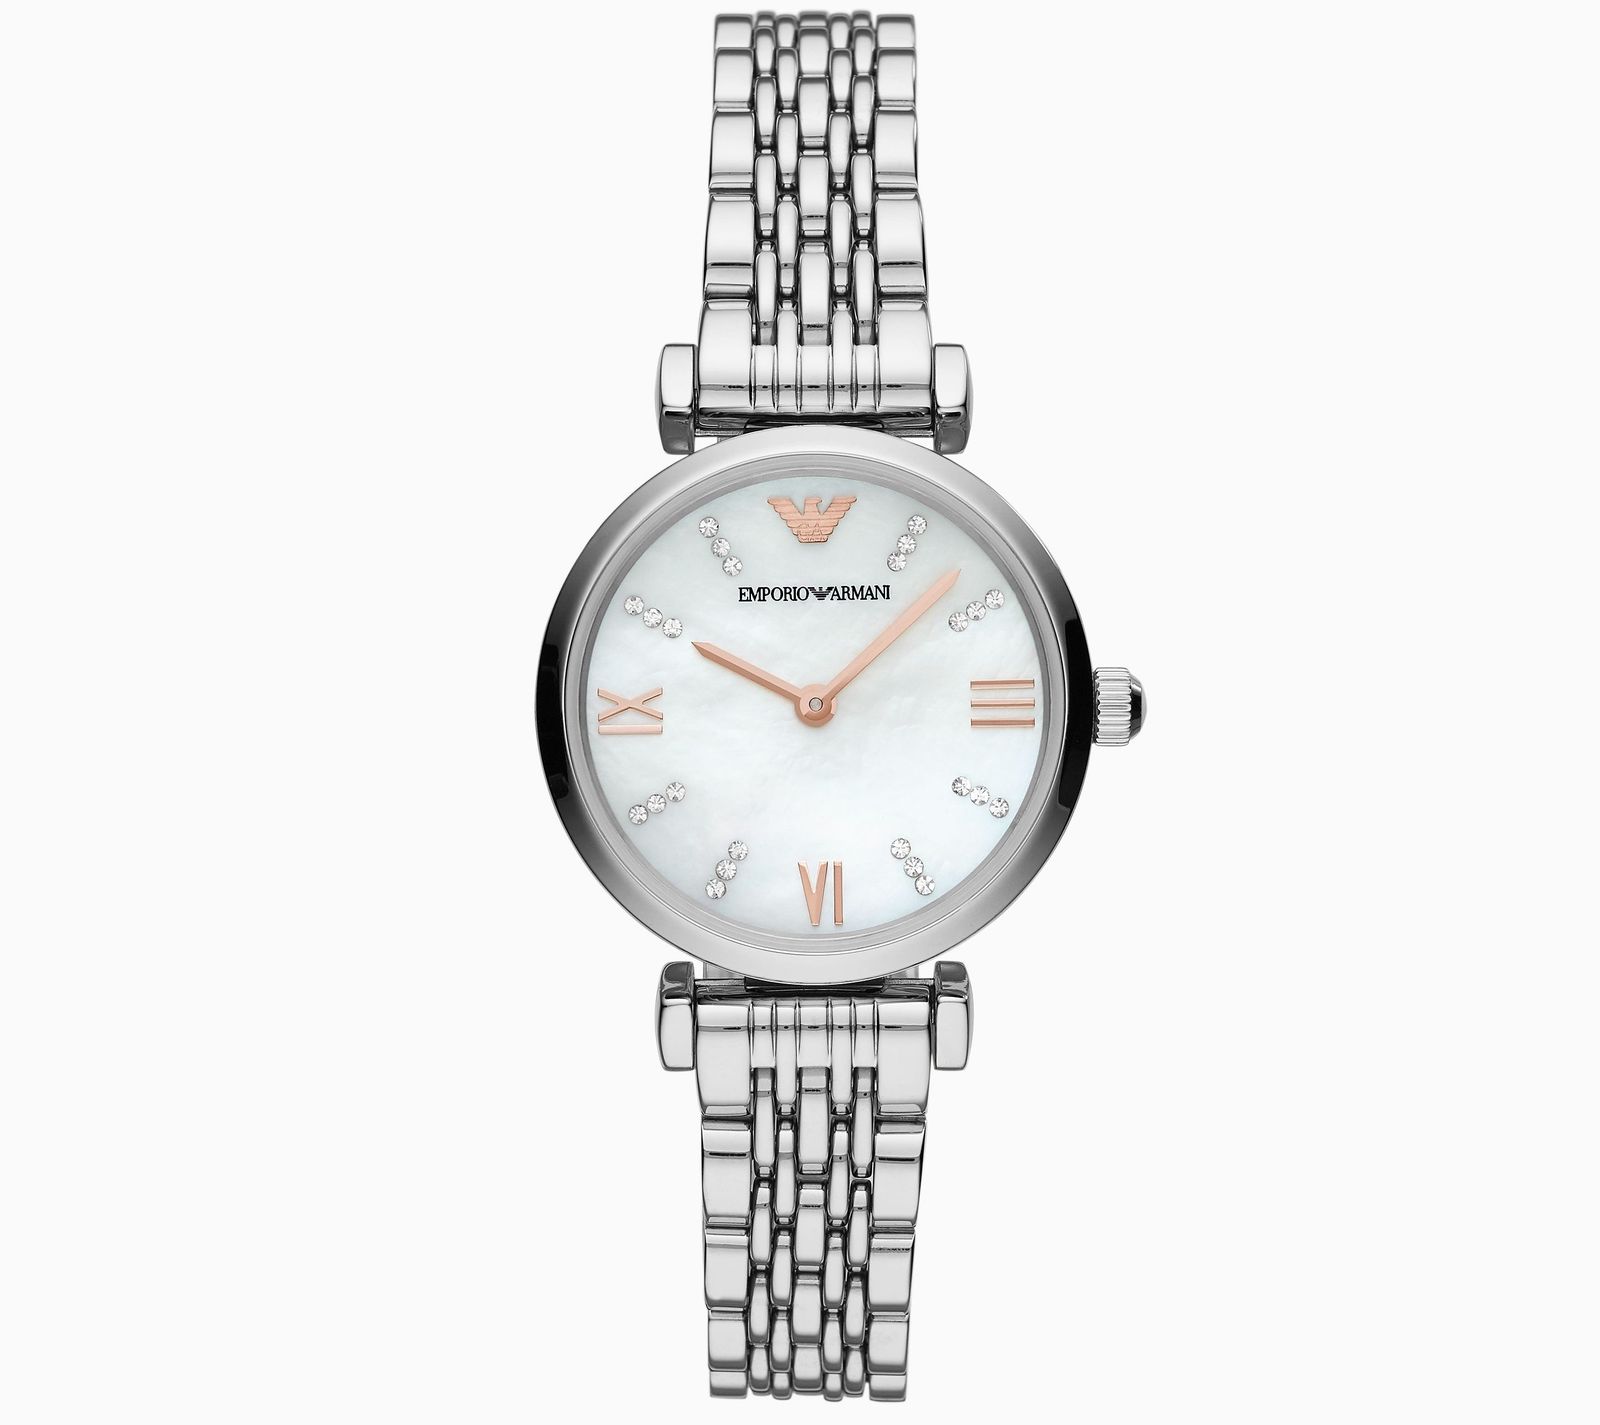 New Emporio Armani AR11204 Crystal White Mother of Pearl Dial Women's Watch